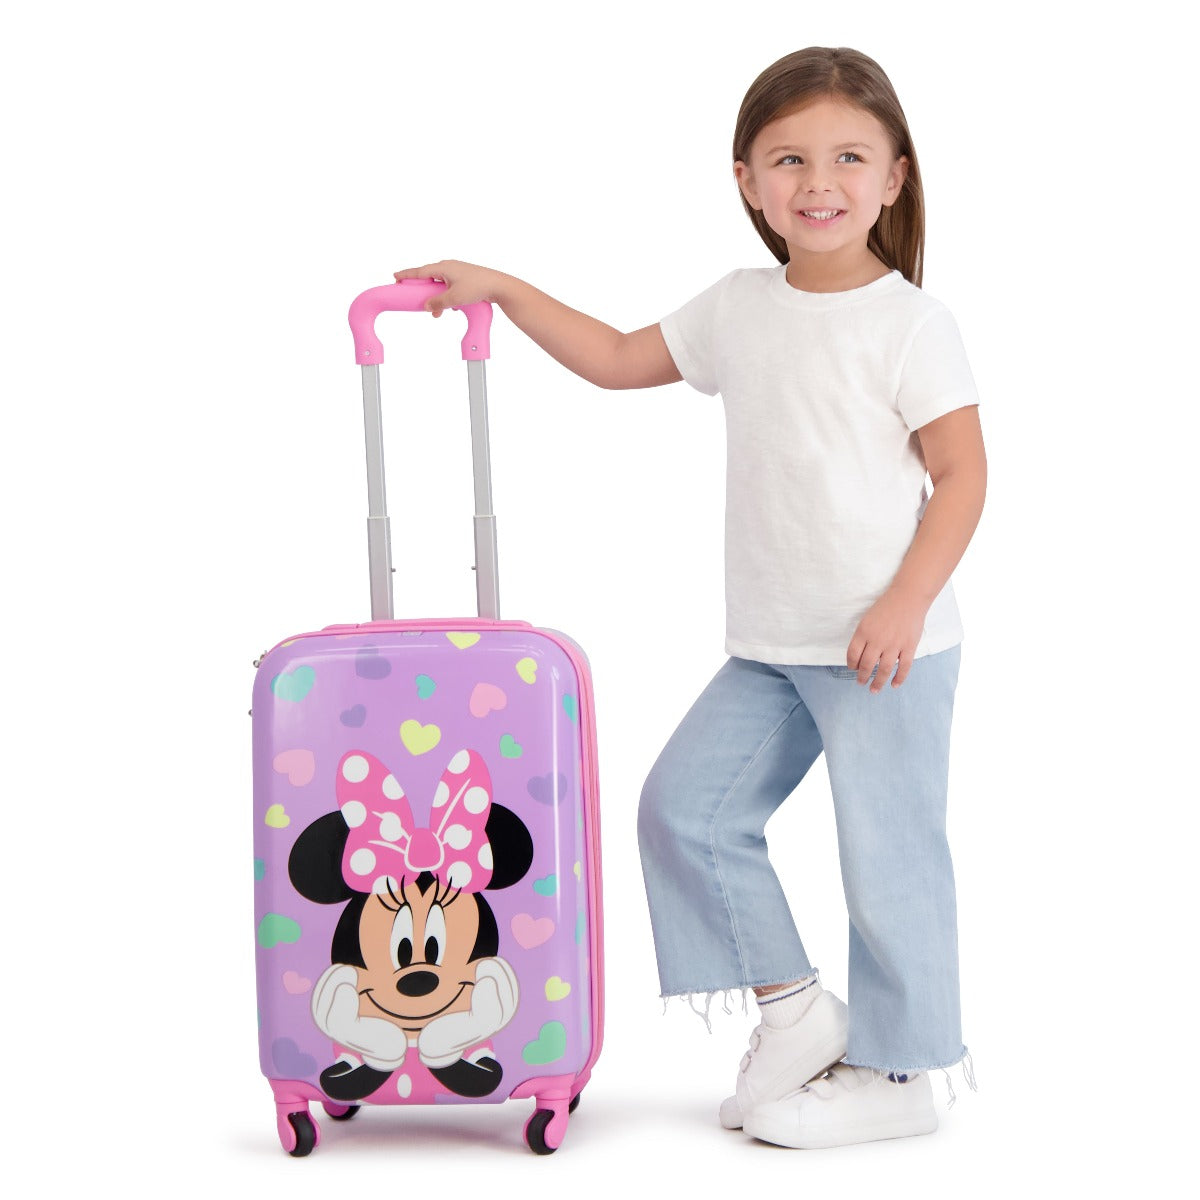 Pink Disney Ful Minnie Mouse hearts all over print 21" suitcase - best kids carry-on luggage for travel